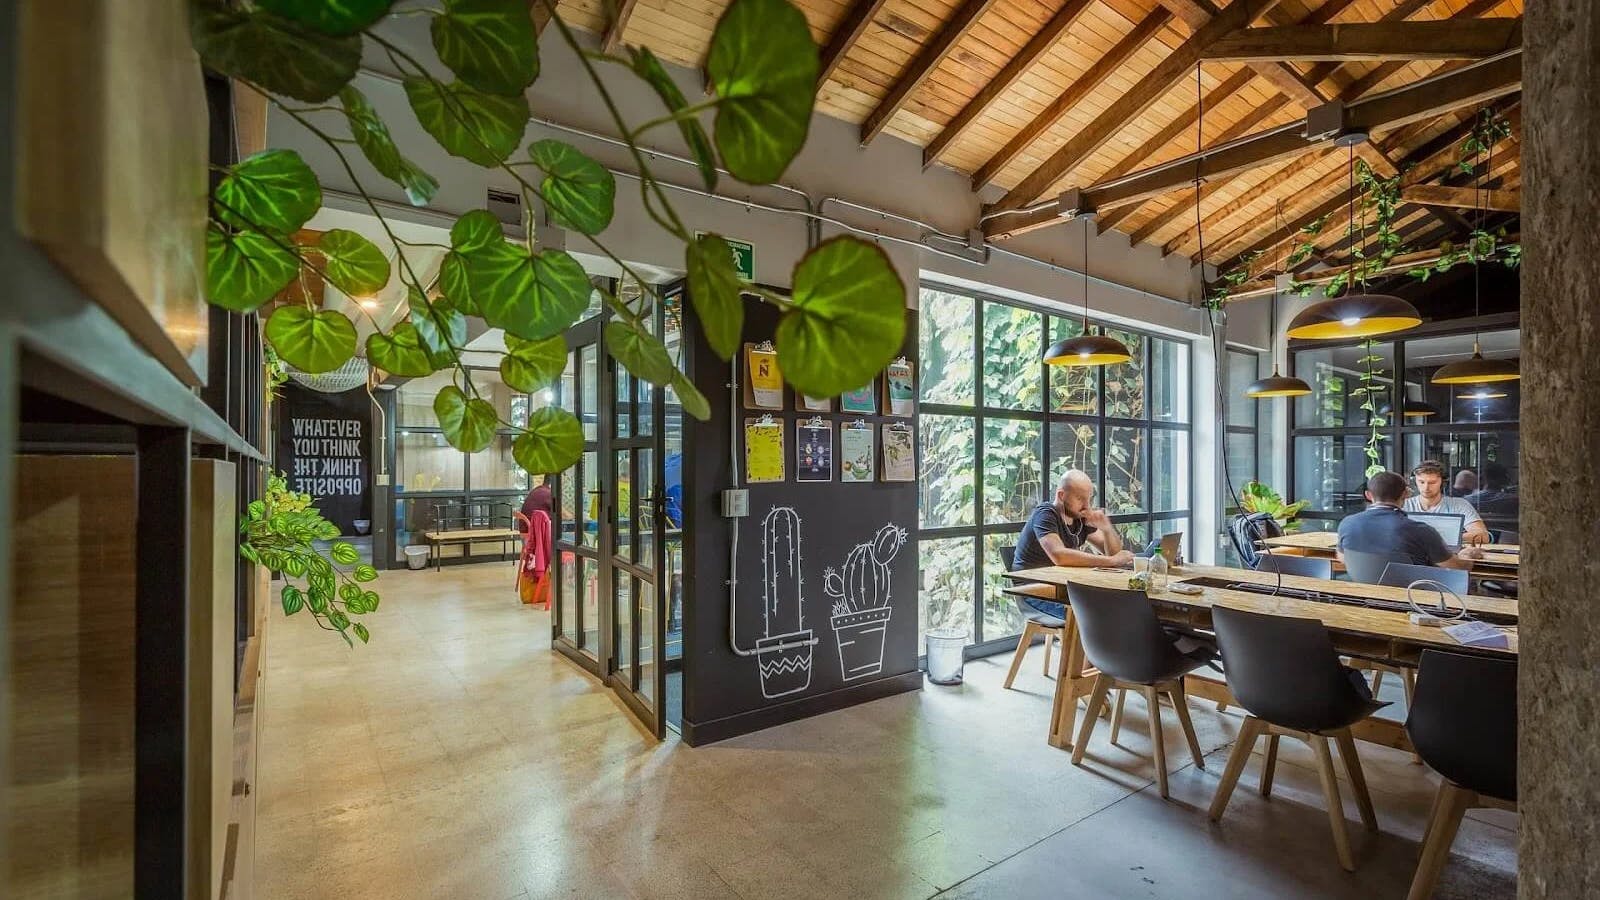 People working at a Coworking space in Medellin